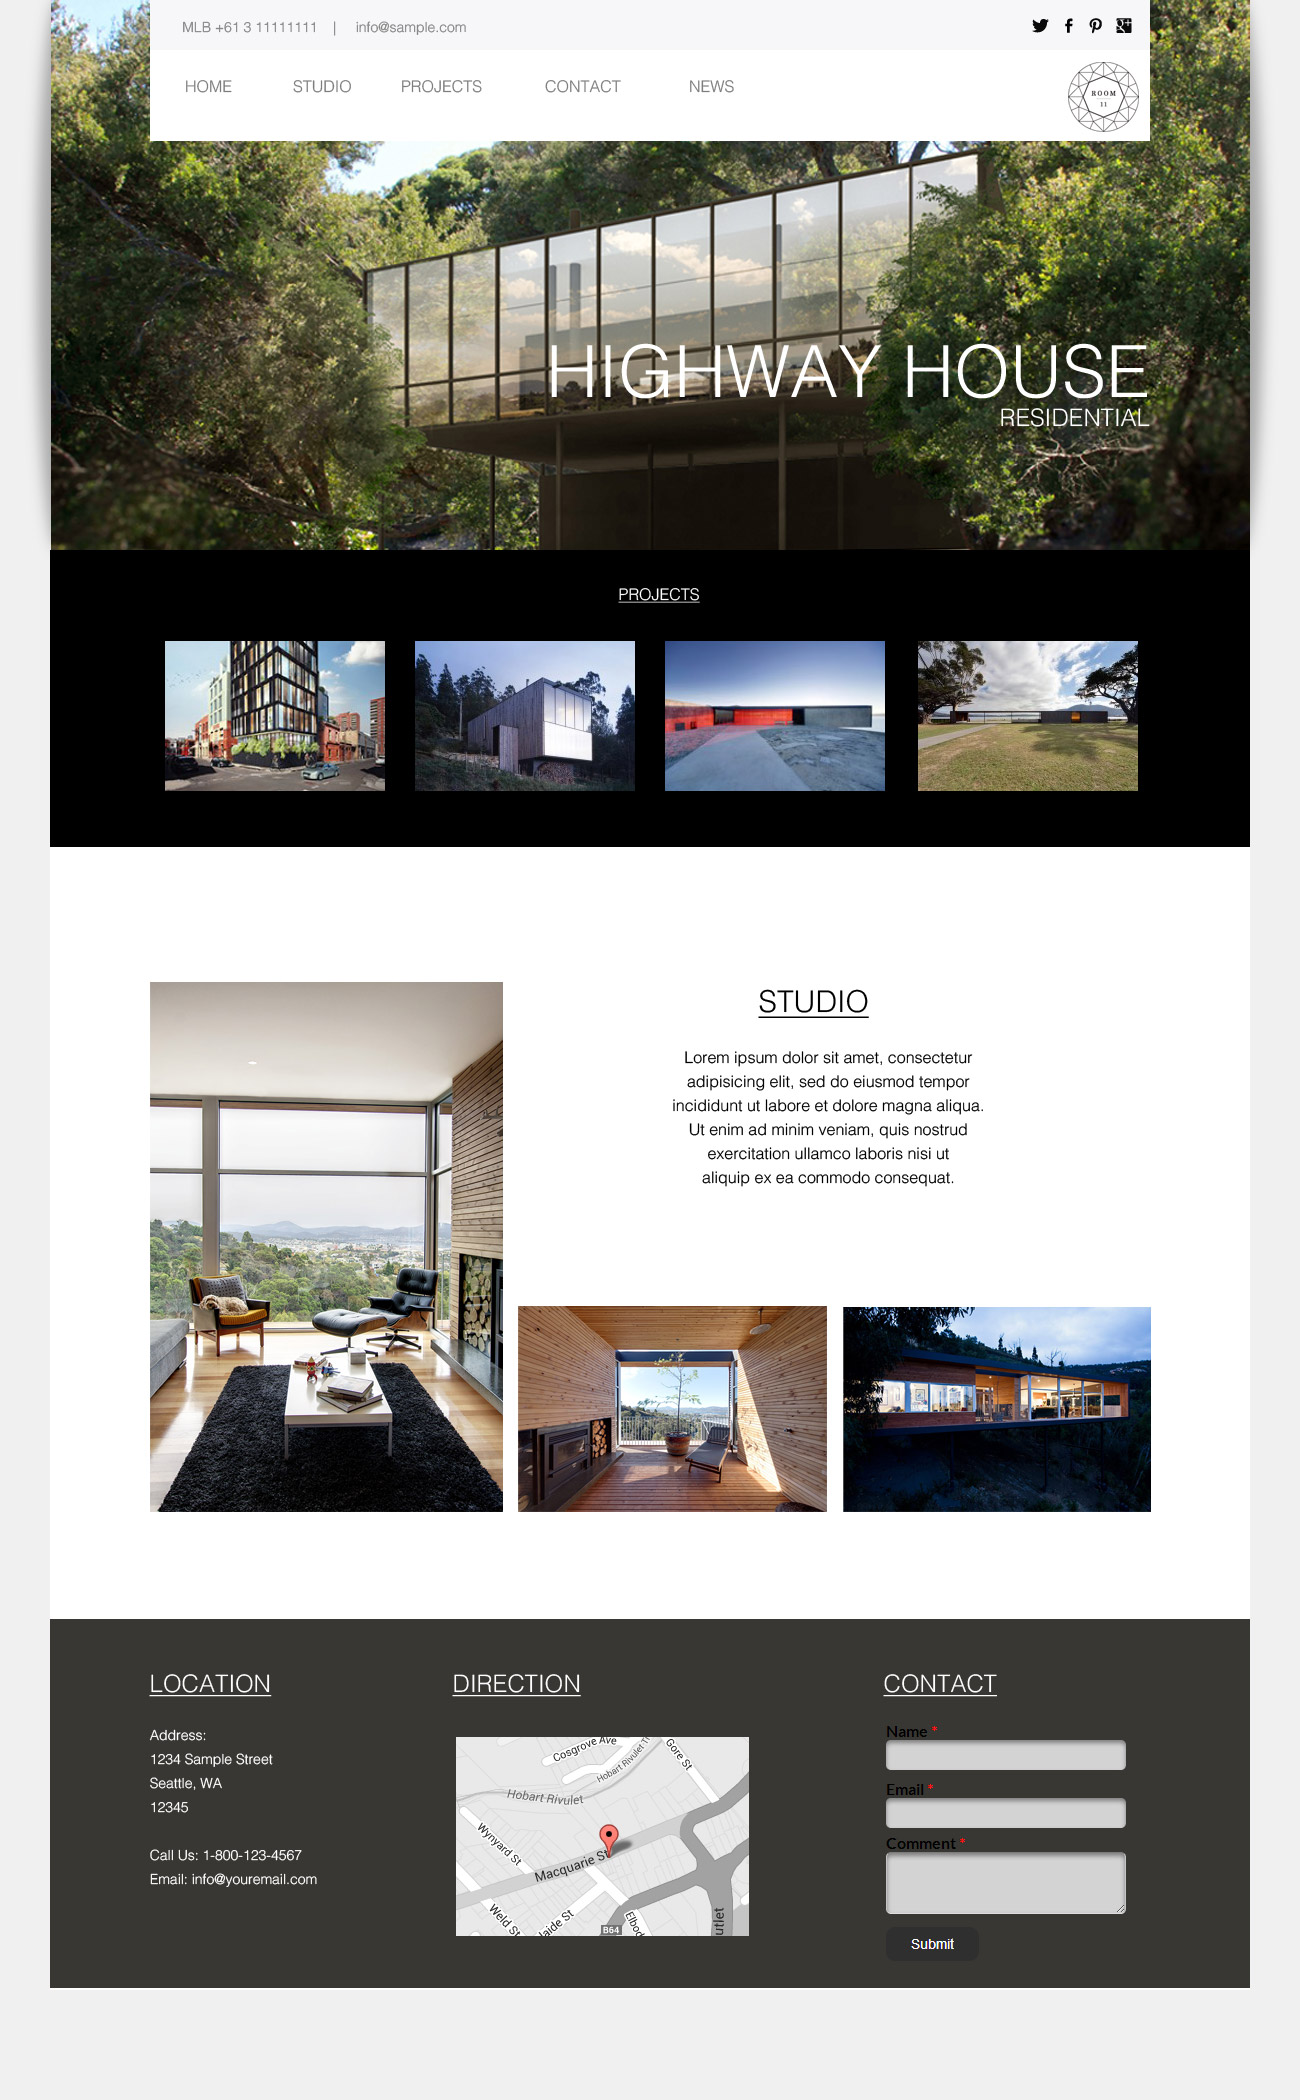 23 Easy-to-Use Real Estate Website Templates & Themes